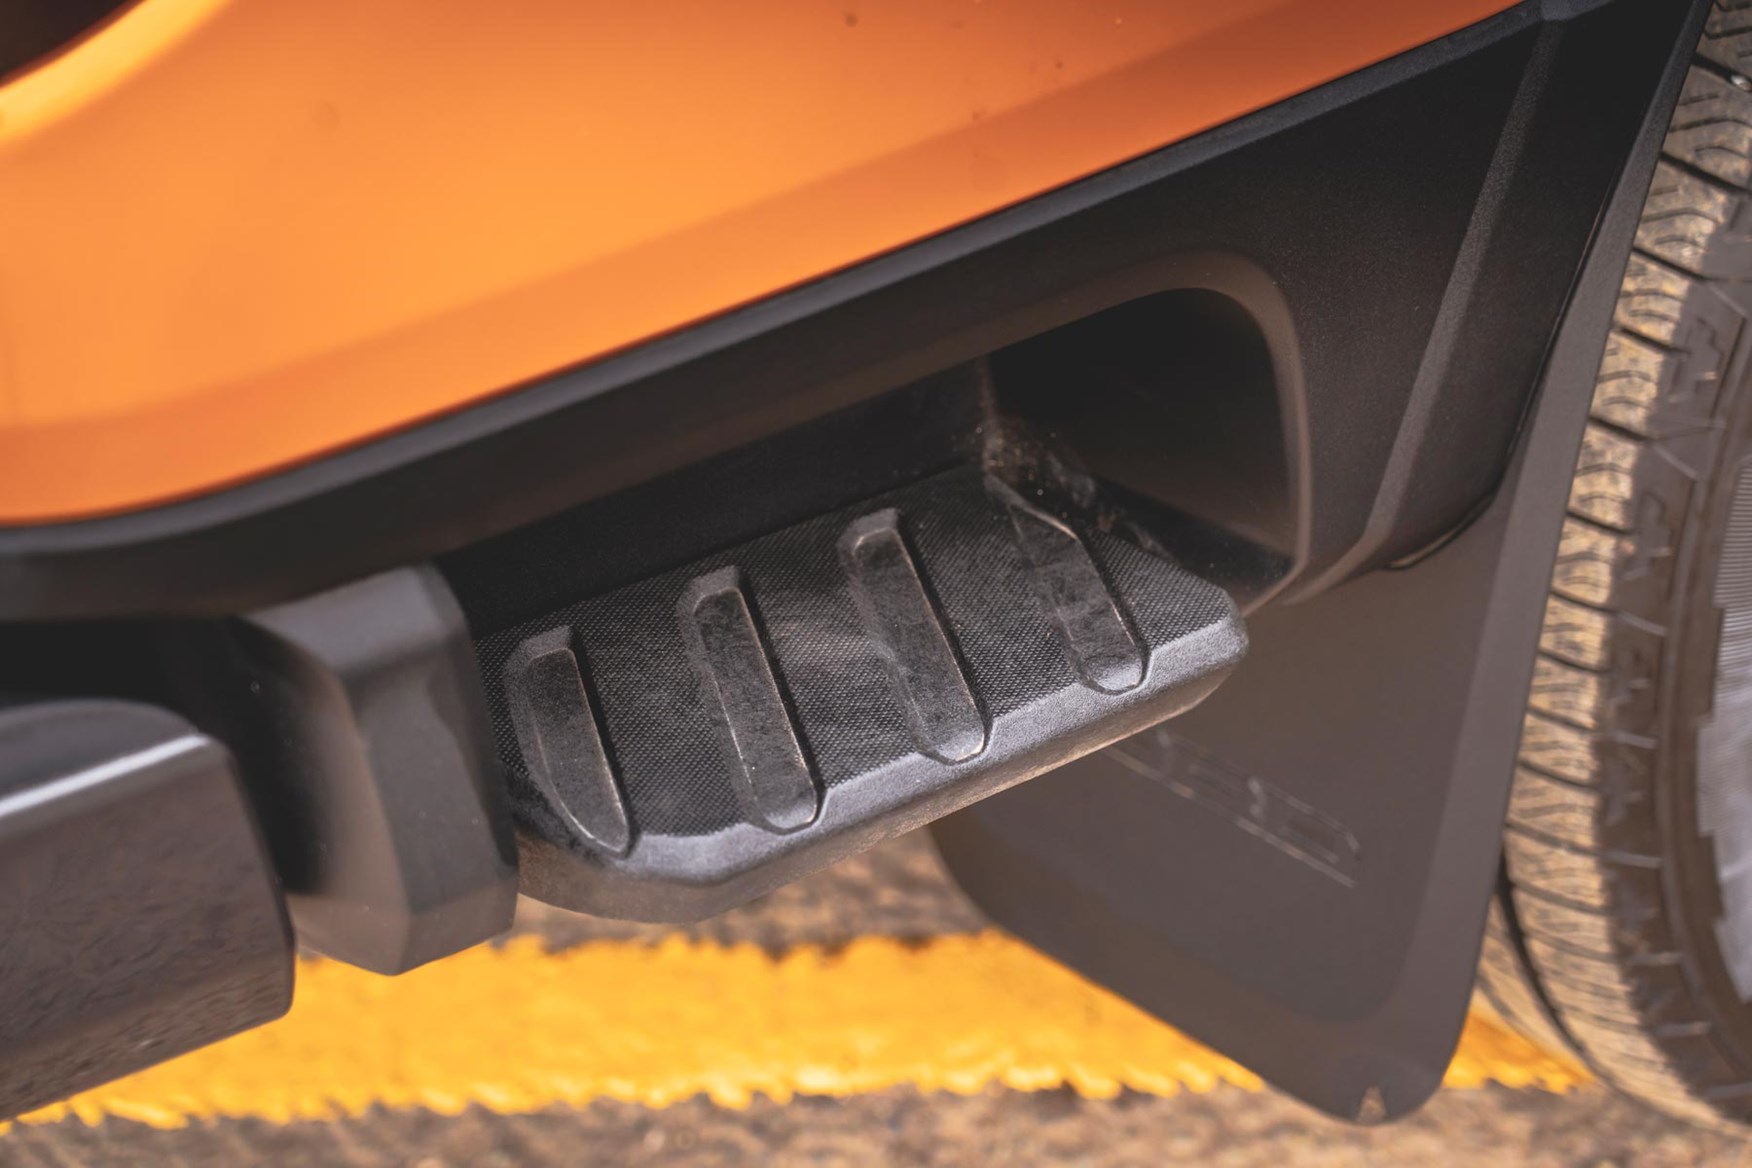 Ford Ranger's side step is a genius feature.